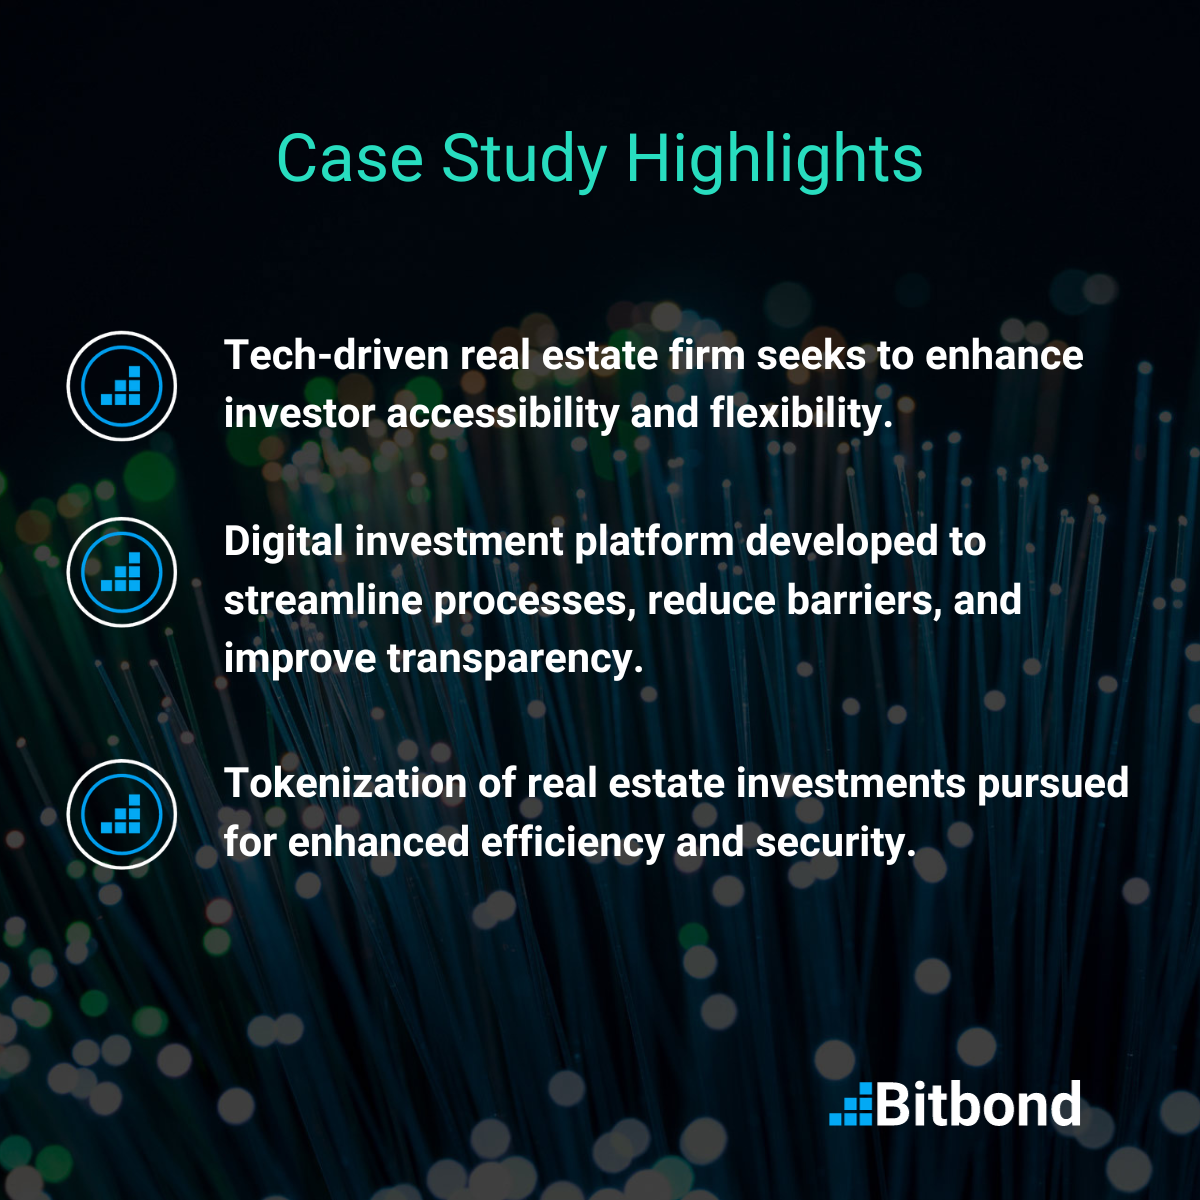 Image describing the highlights for this tokenized real estate case study